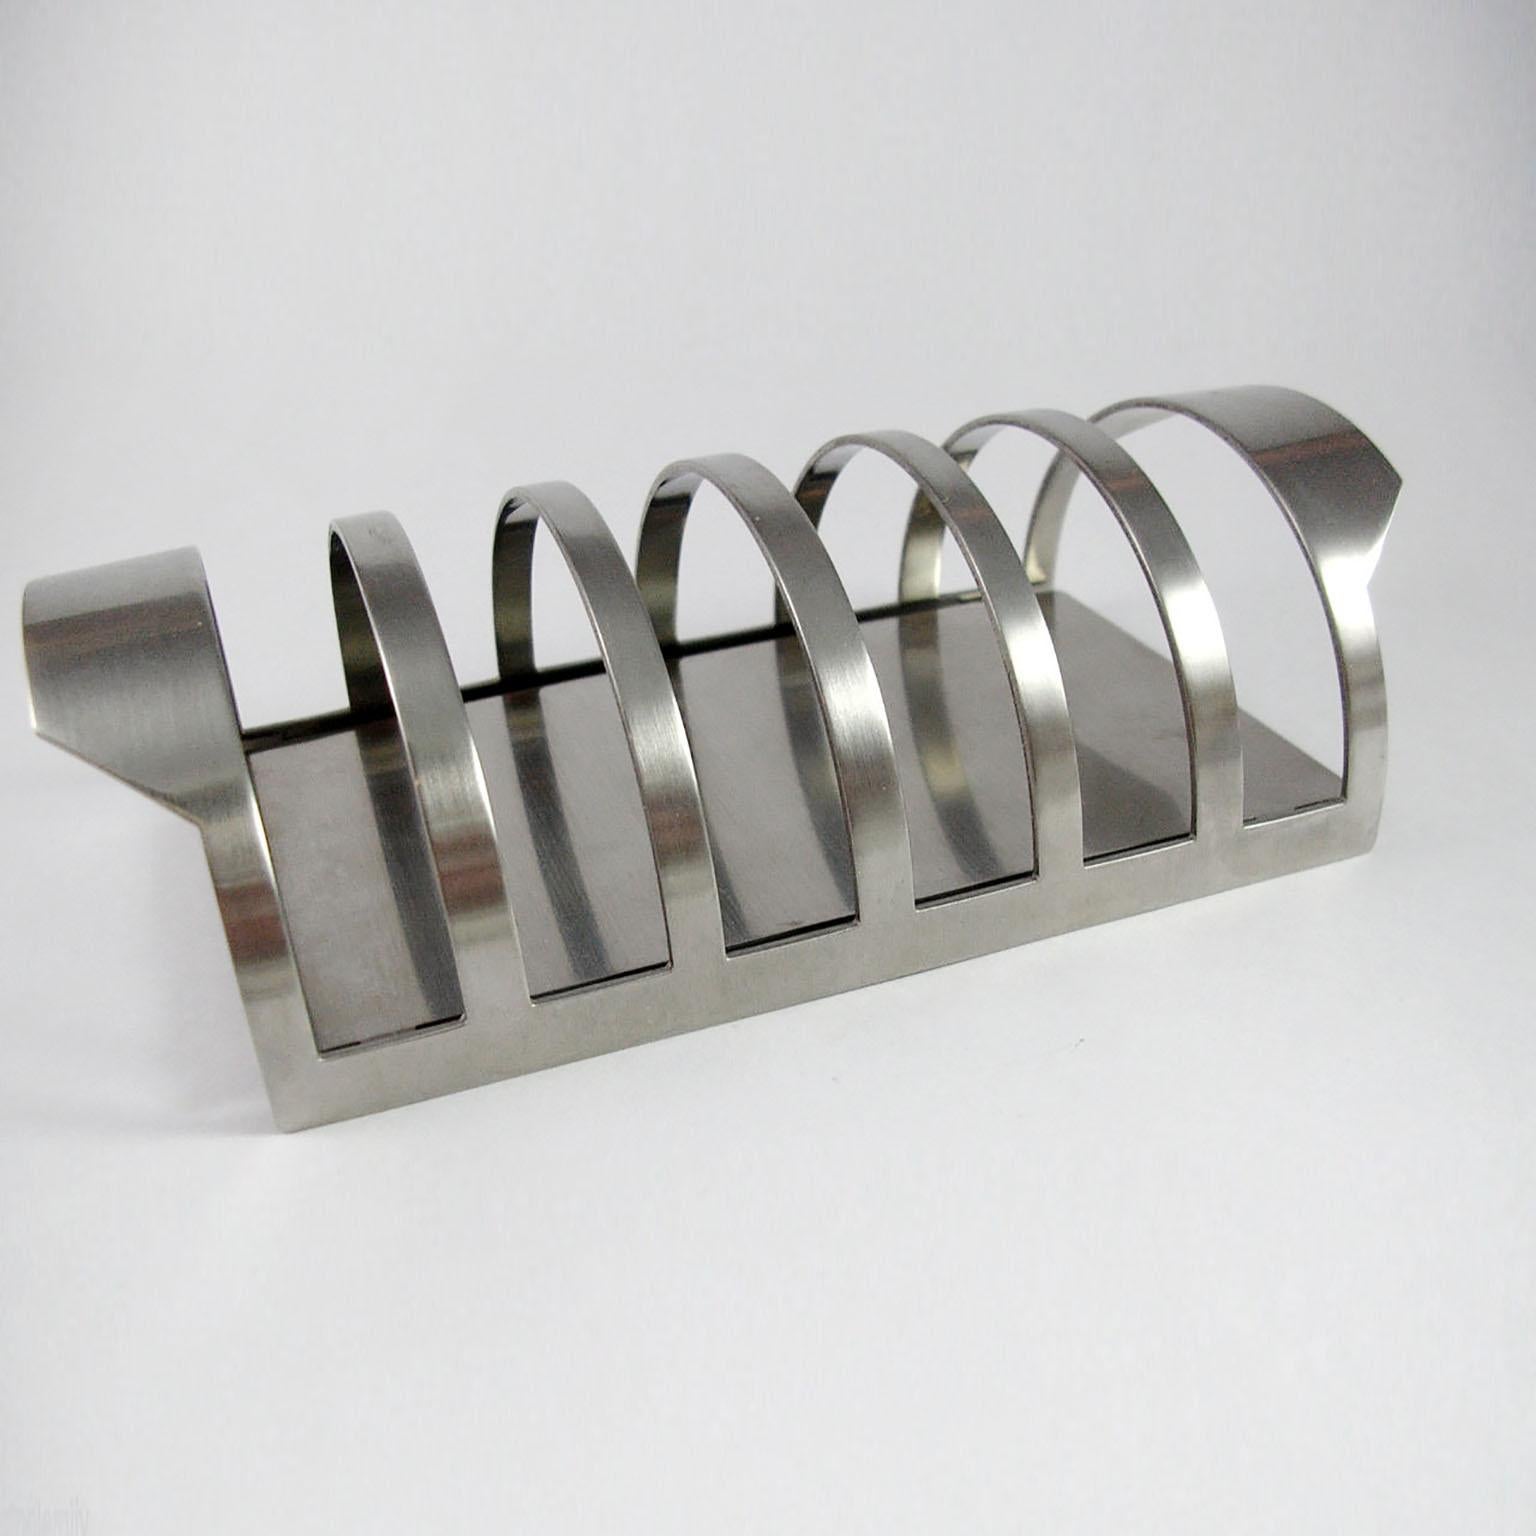 Toast rack from the 'Cylinda-Line' service, designed by Arne Jacobsen for Stelton Denmark in 1967, not anymore in production.
Made of stainless steel, barrel-shaped rack on a flat base, the handles formed as extensions to the racks at each end, the